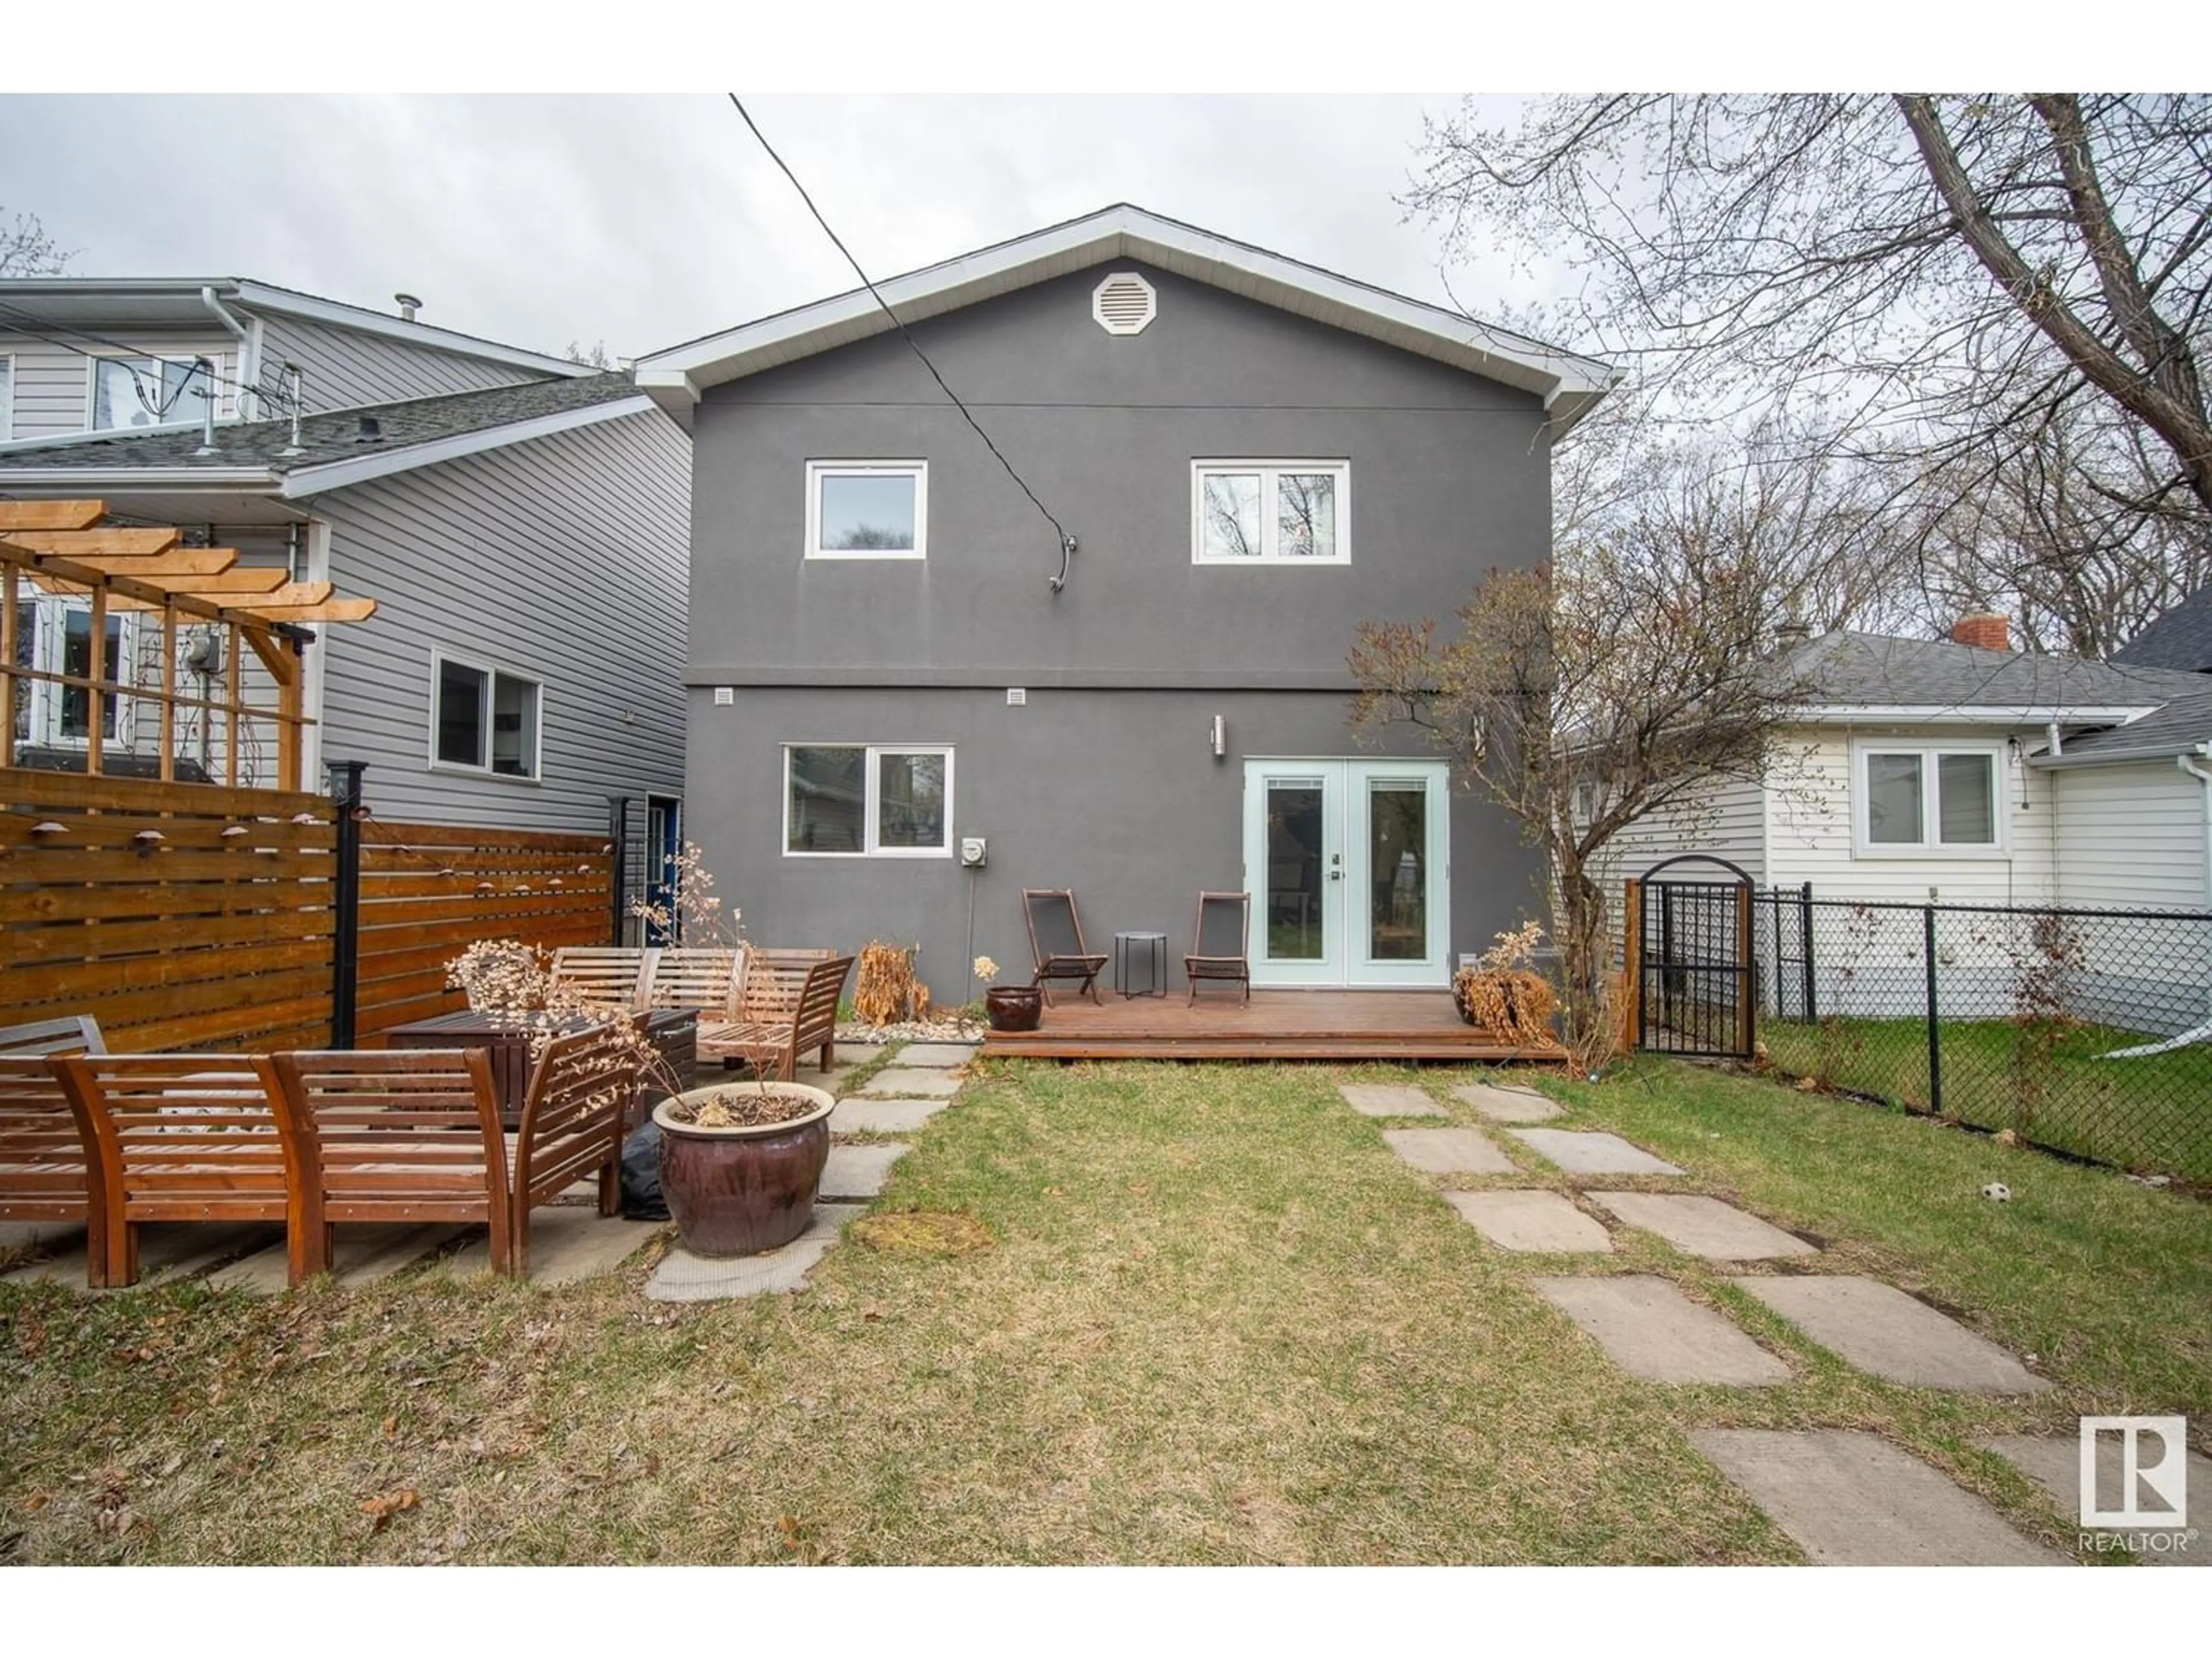 Frontside or backside of a home for 11142 68 ST NW, Edmonton Alberta T5B1N3